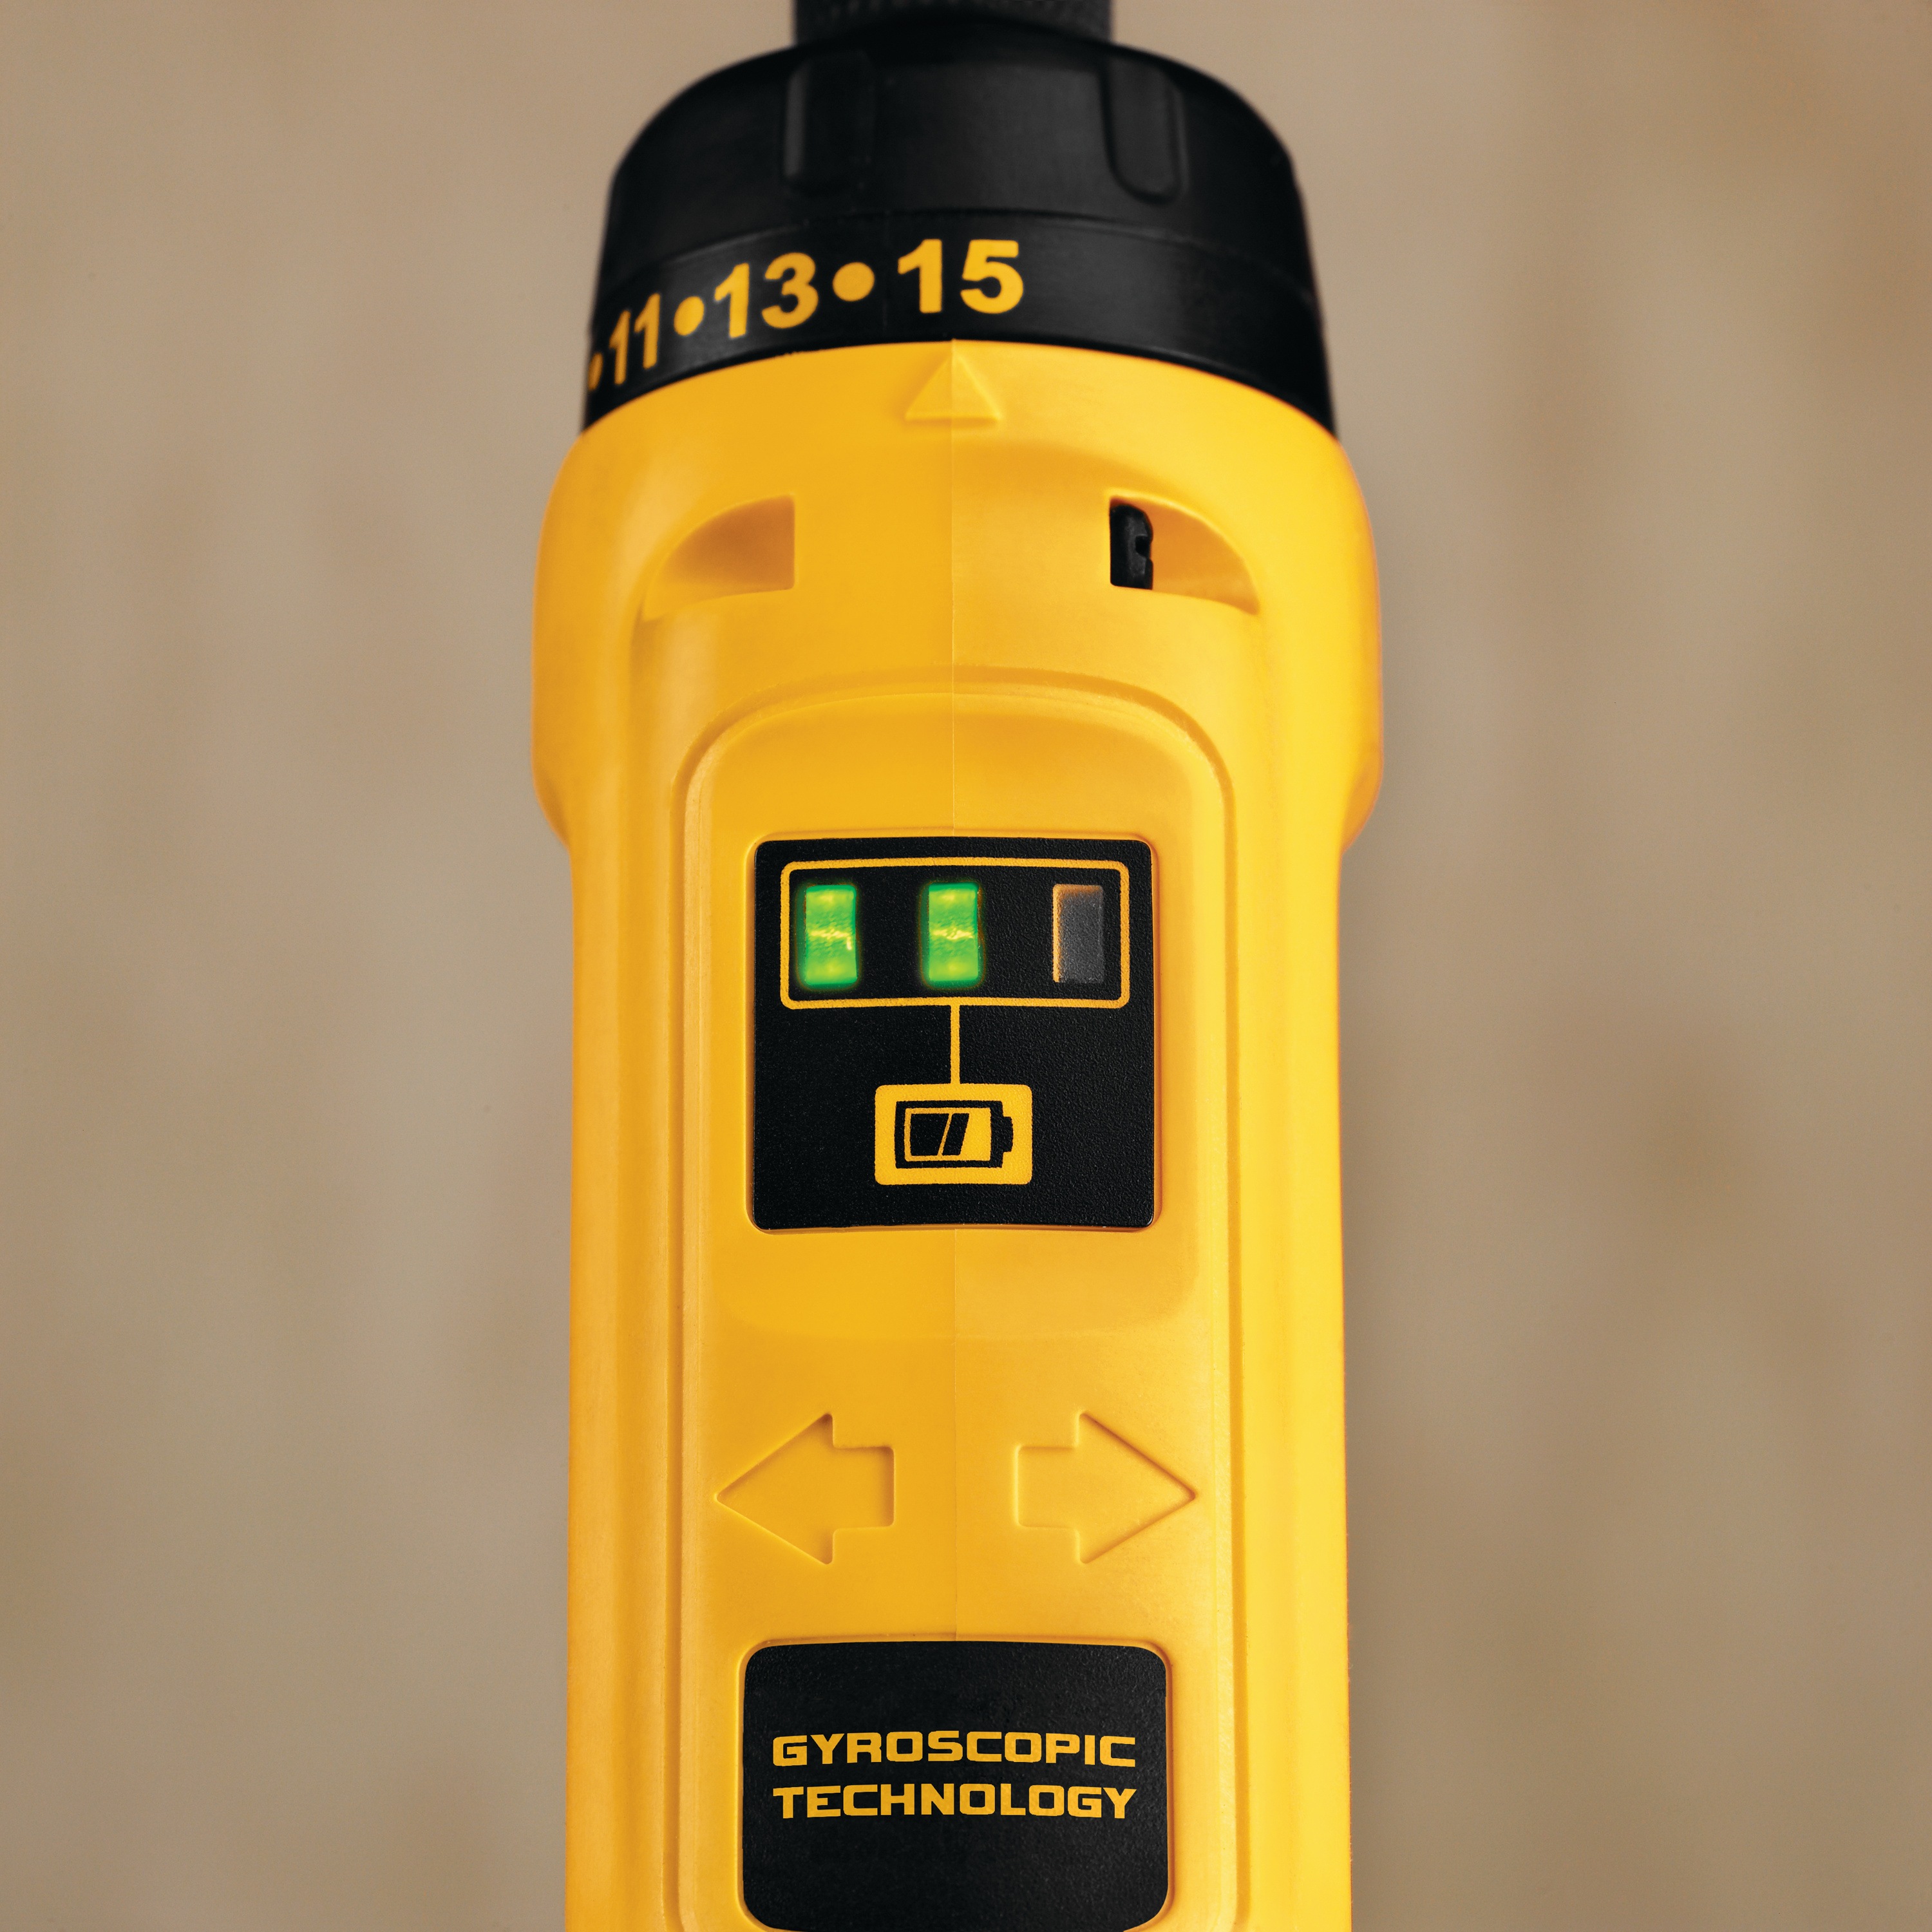 Battery charge status feature on gyroscopic screwdriver 2 battery.